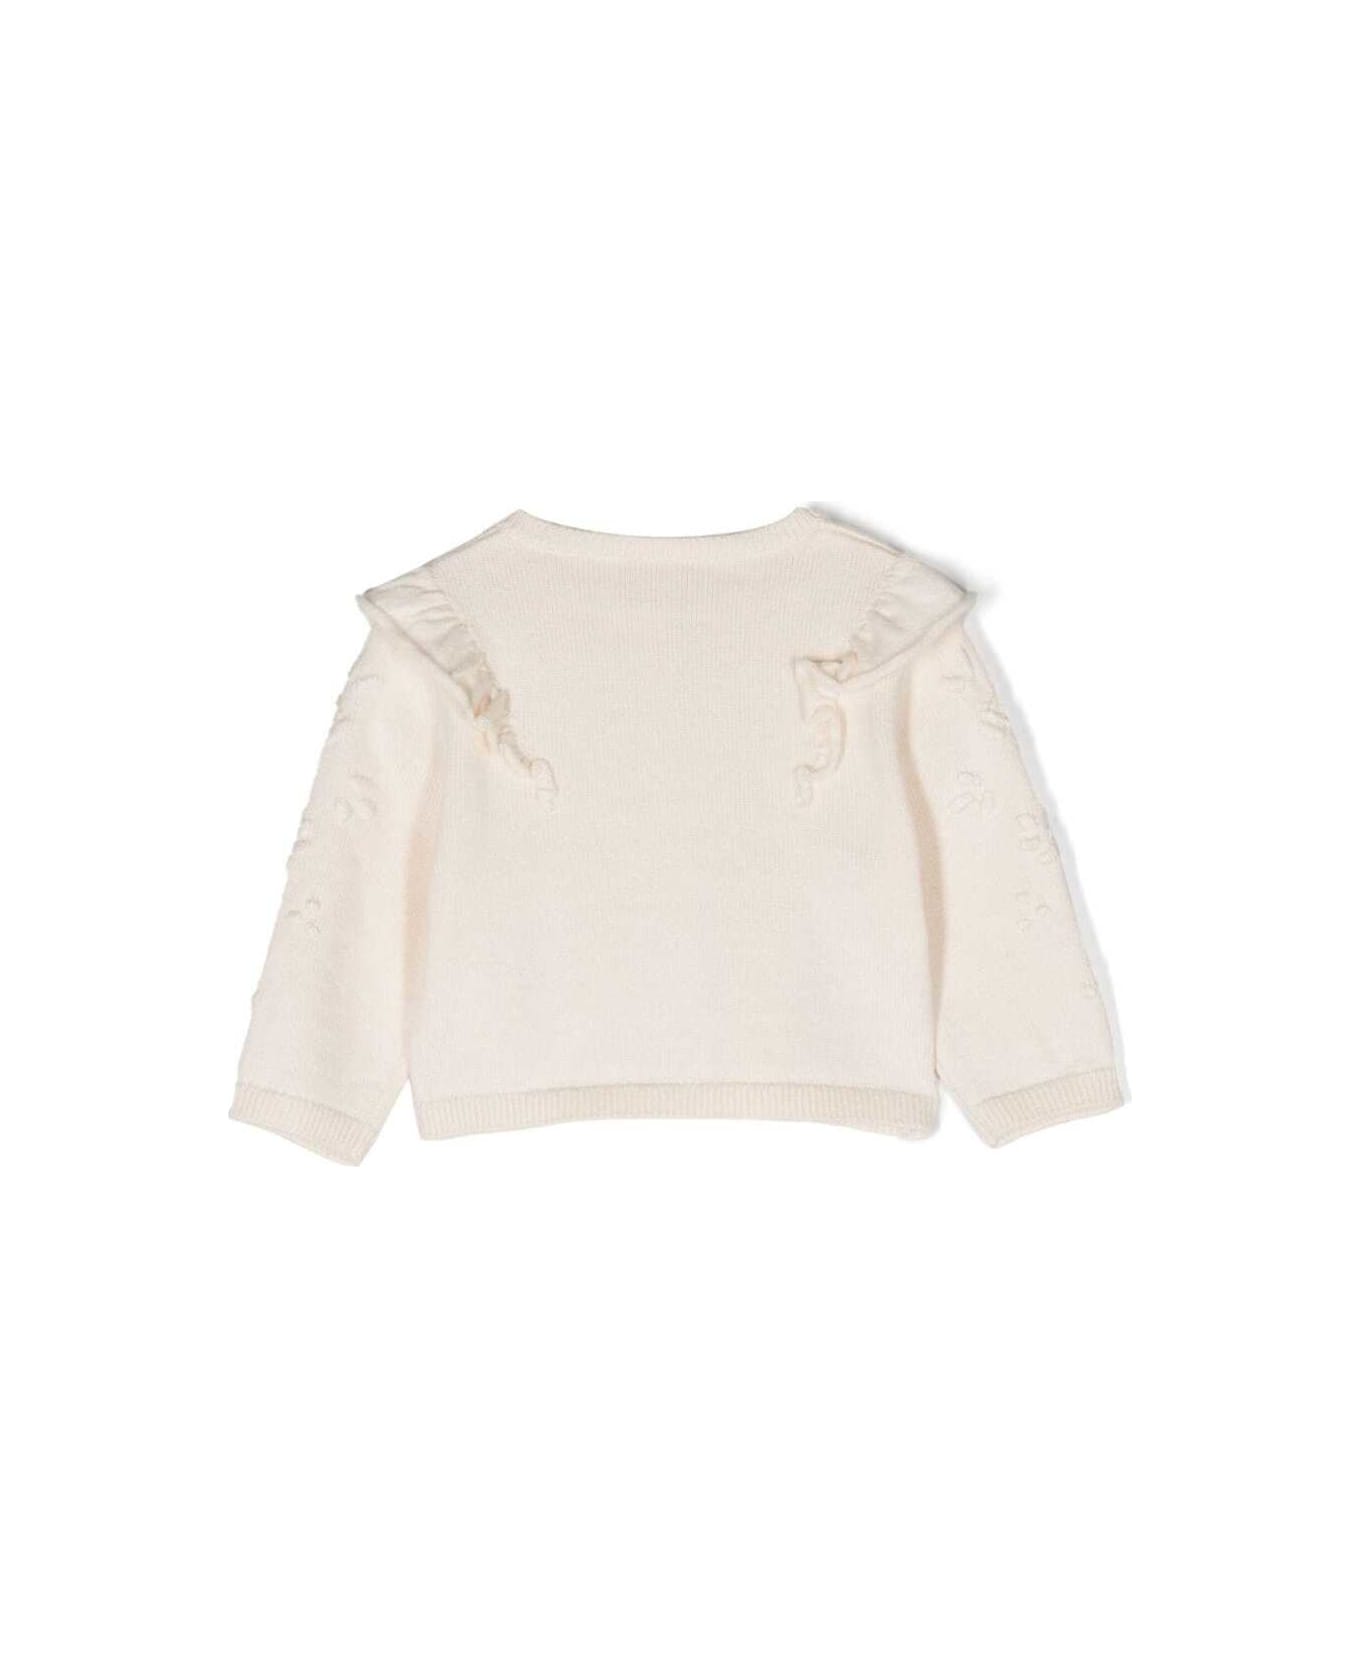 Chloé White Cardigan With Frill And Embroidered Logo In Cotton And Wool Baby - White